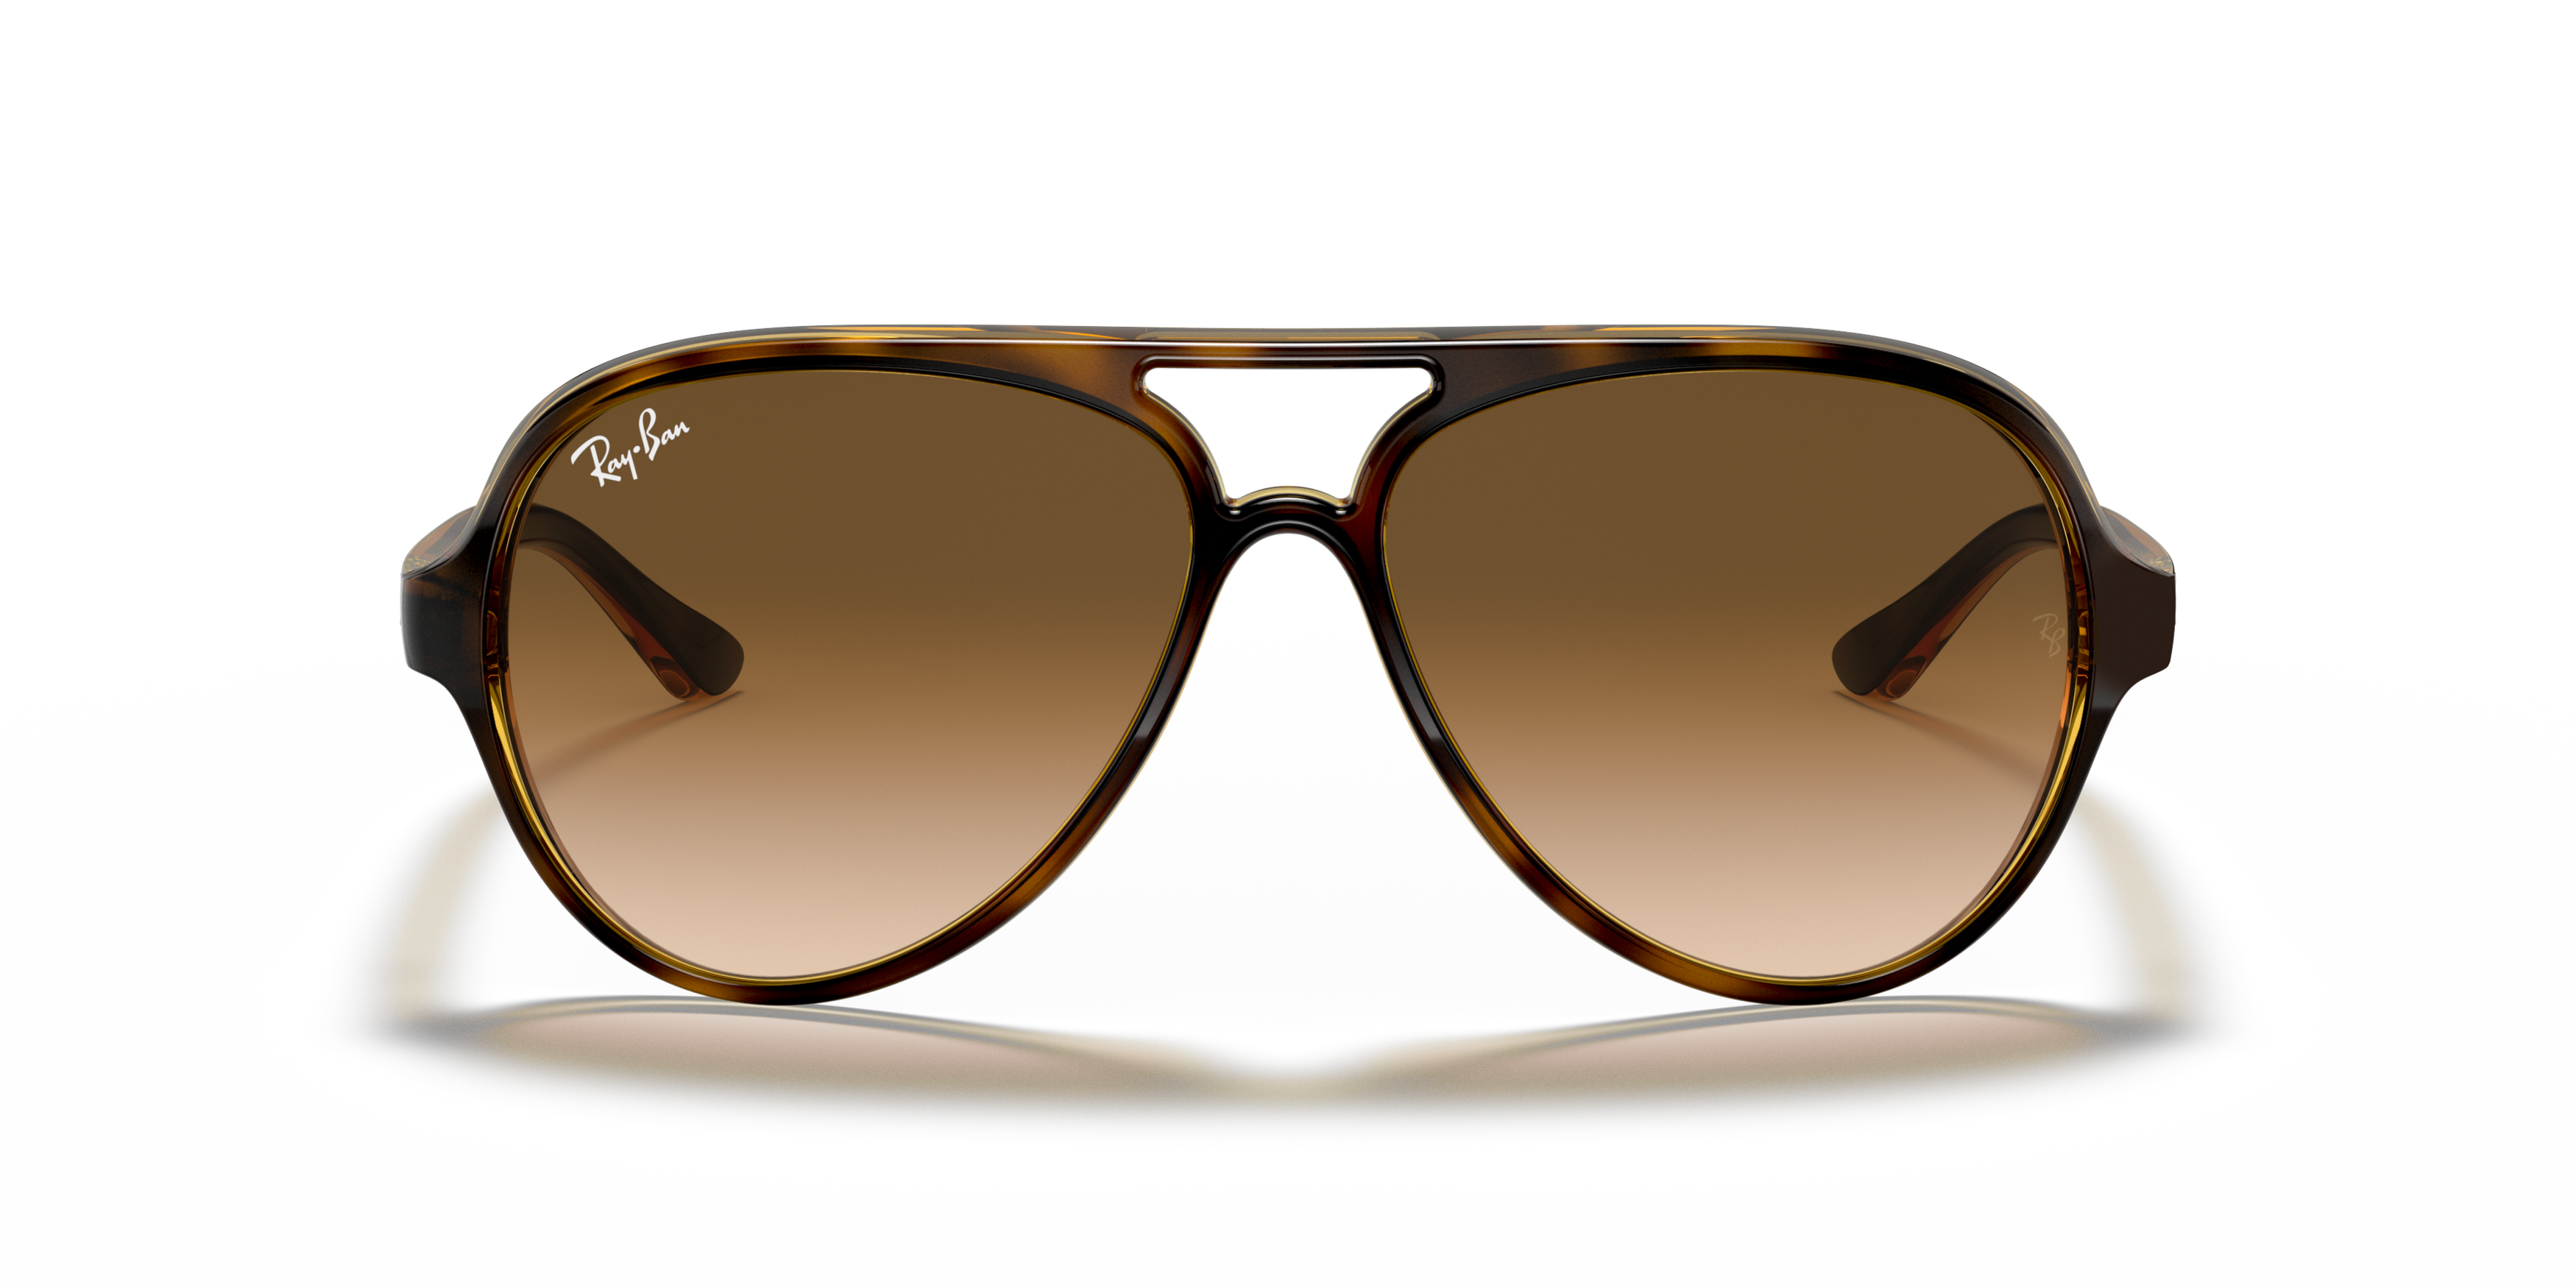 [products.image.front] RAY-BAN RB4125 710/51